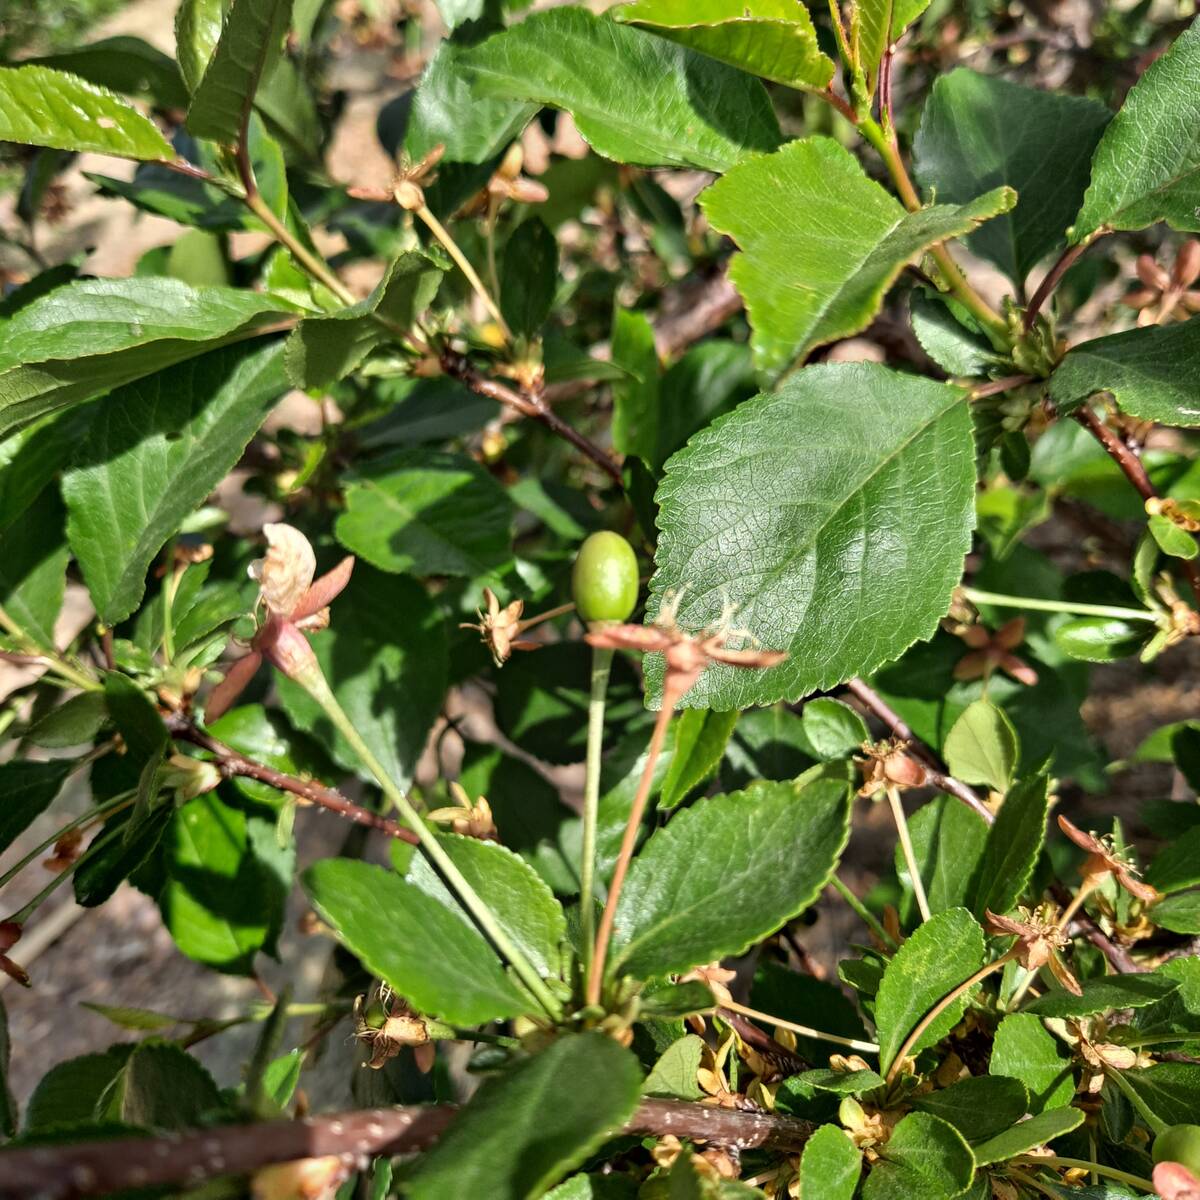 This sour cherry was too green or immature to develop a seed that would be alive. Use fully mat ...